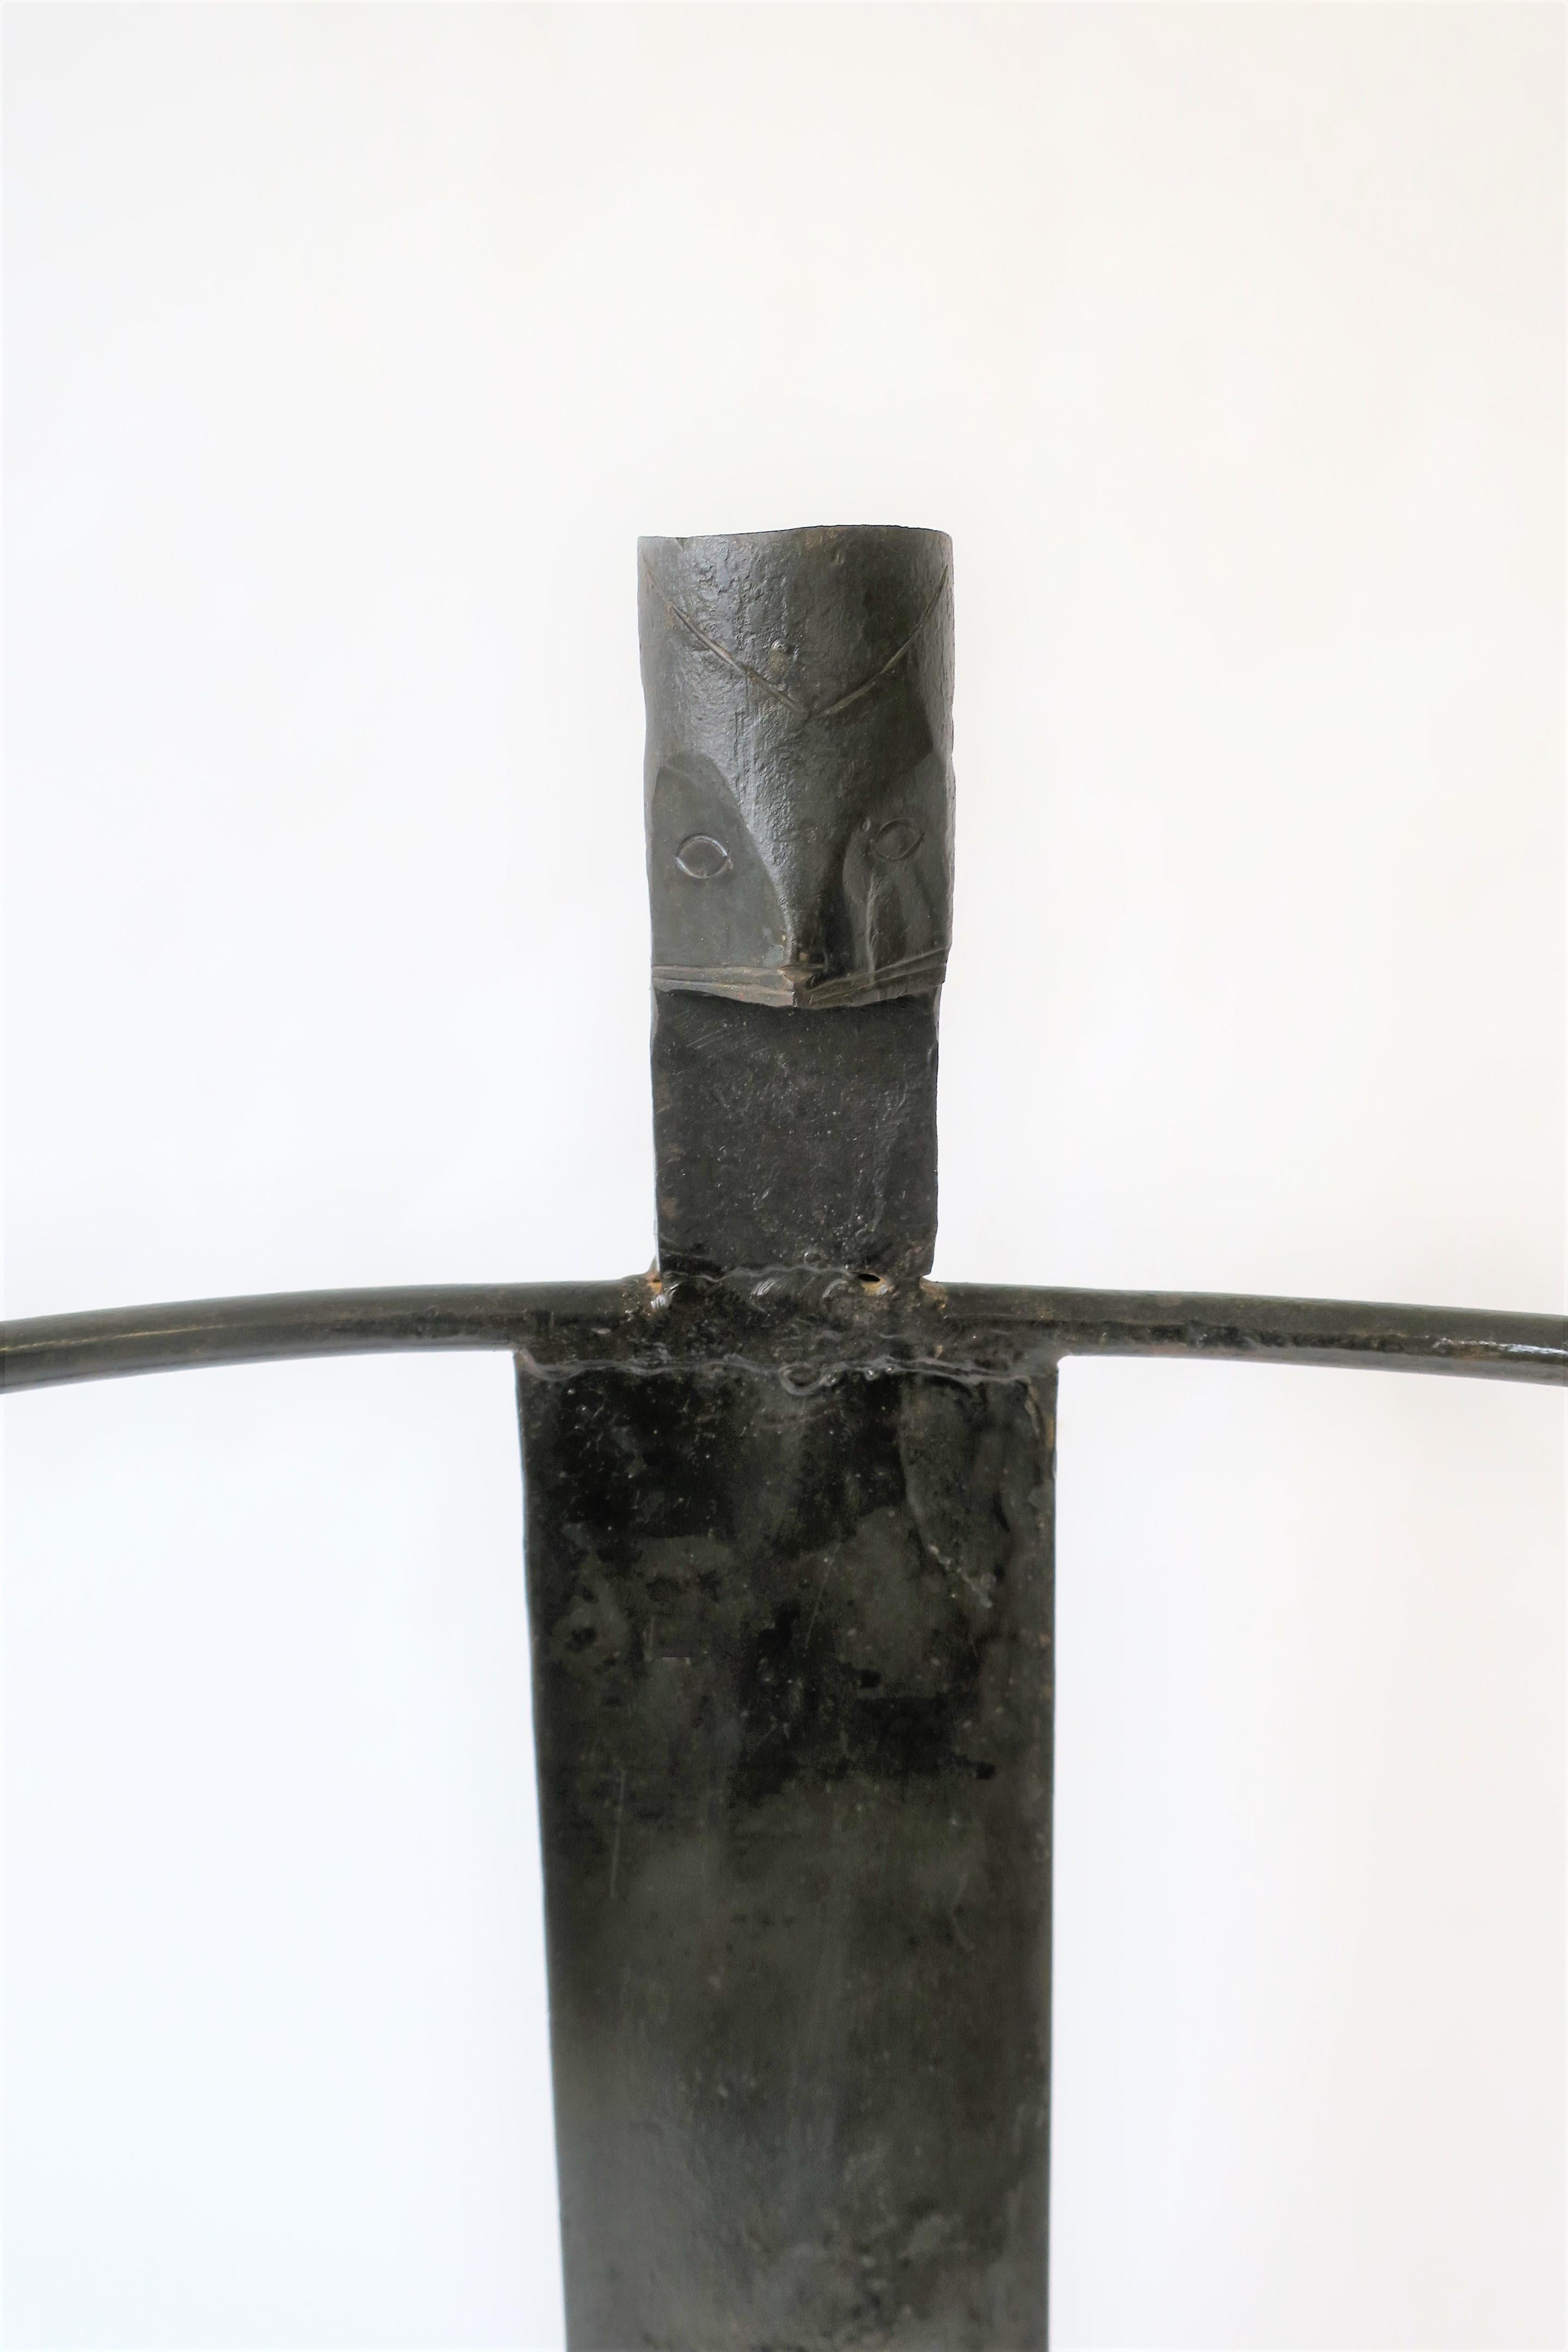 Hand-Crafted Metal Primitive or Tribal Sculpture with Spear and Light